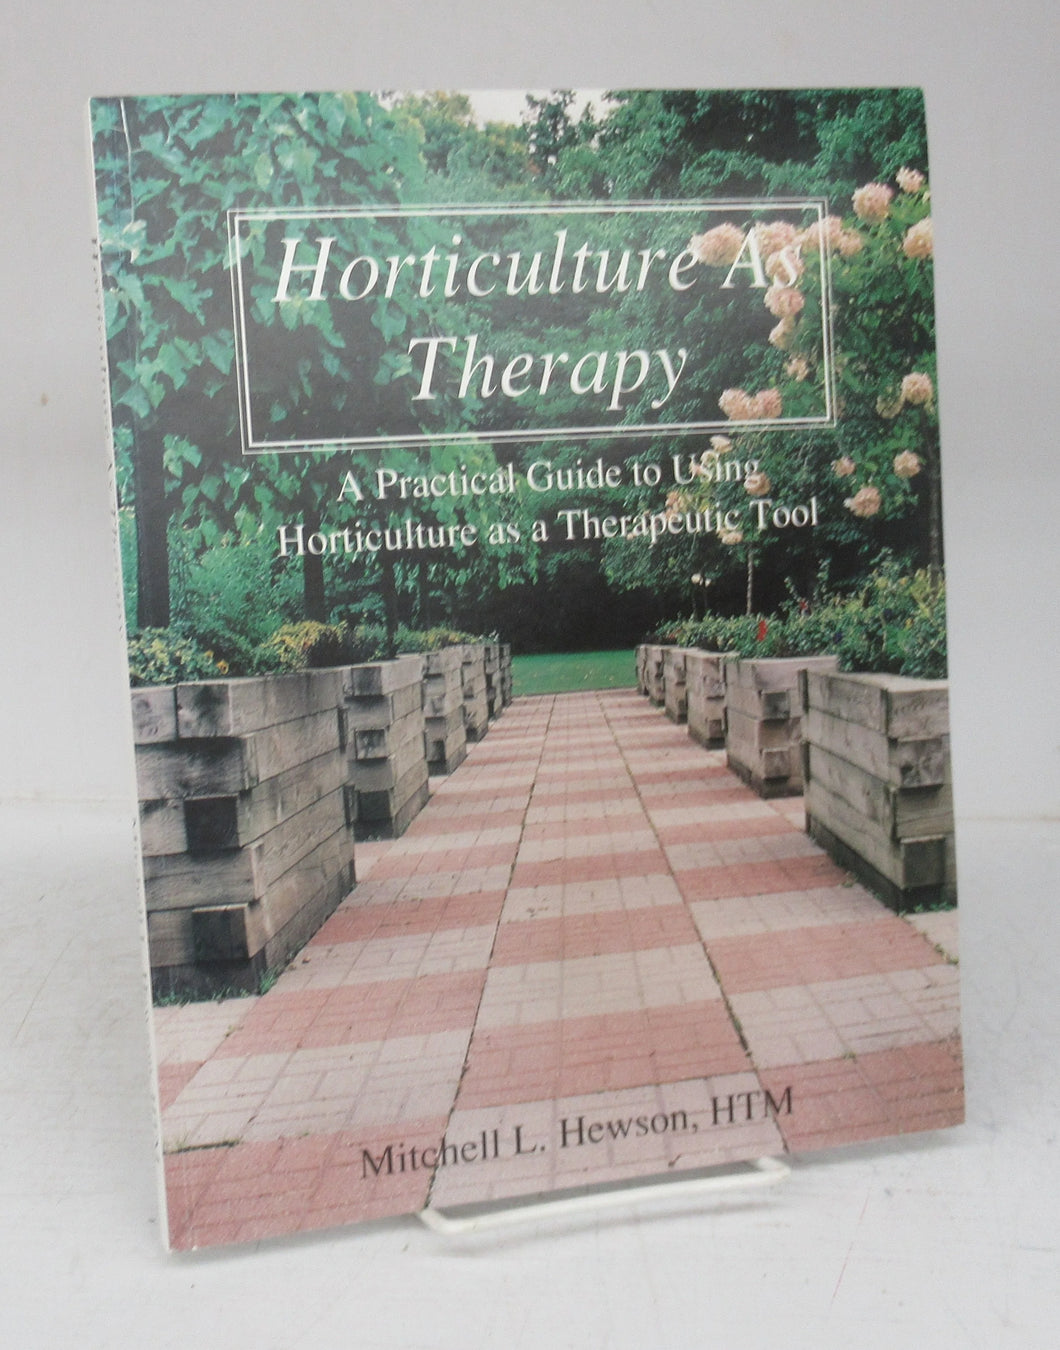 Horticulture As Therapy: A  Practical Guide to Using Horticulture as a Therapeutic Tool